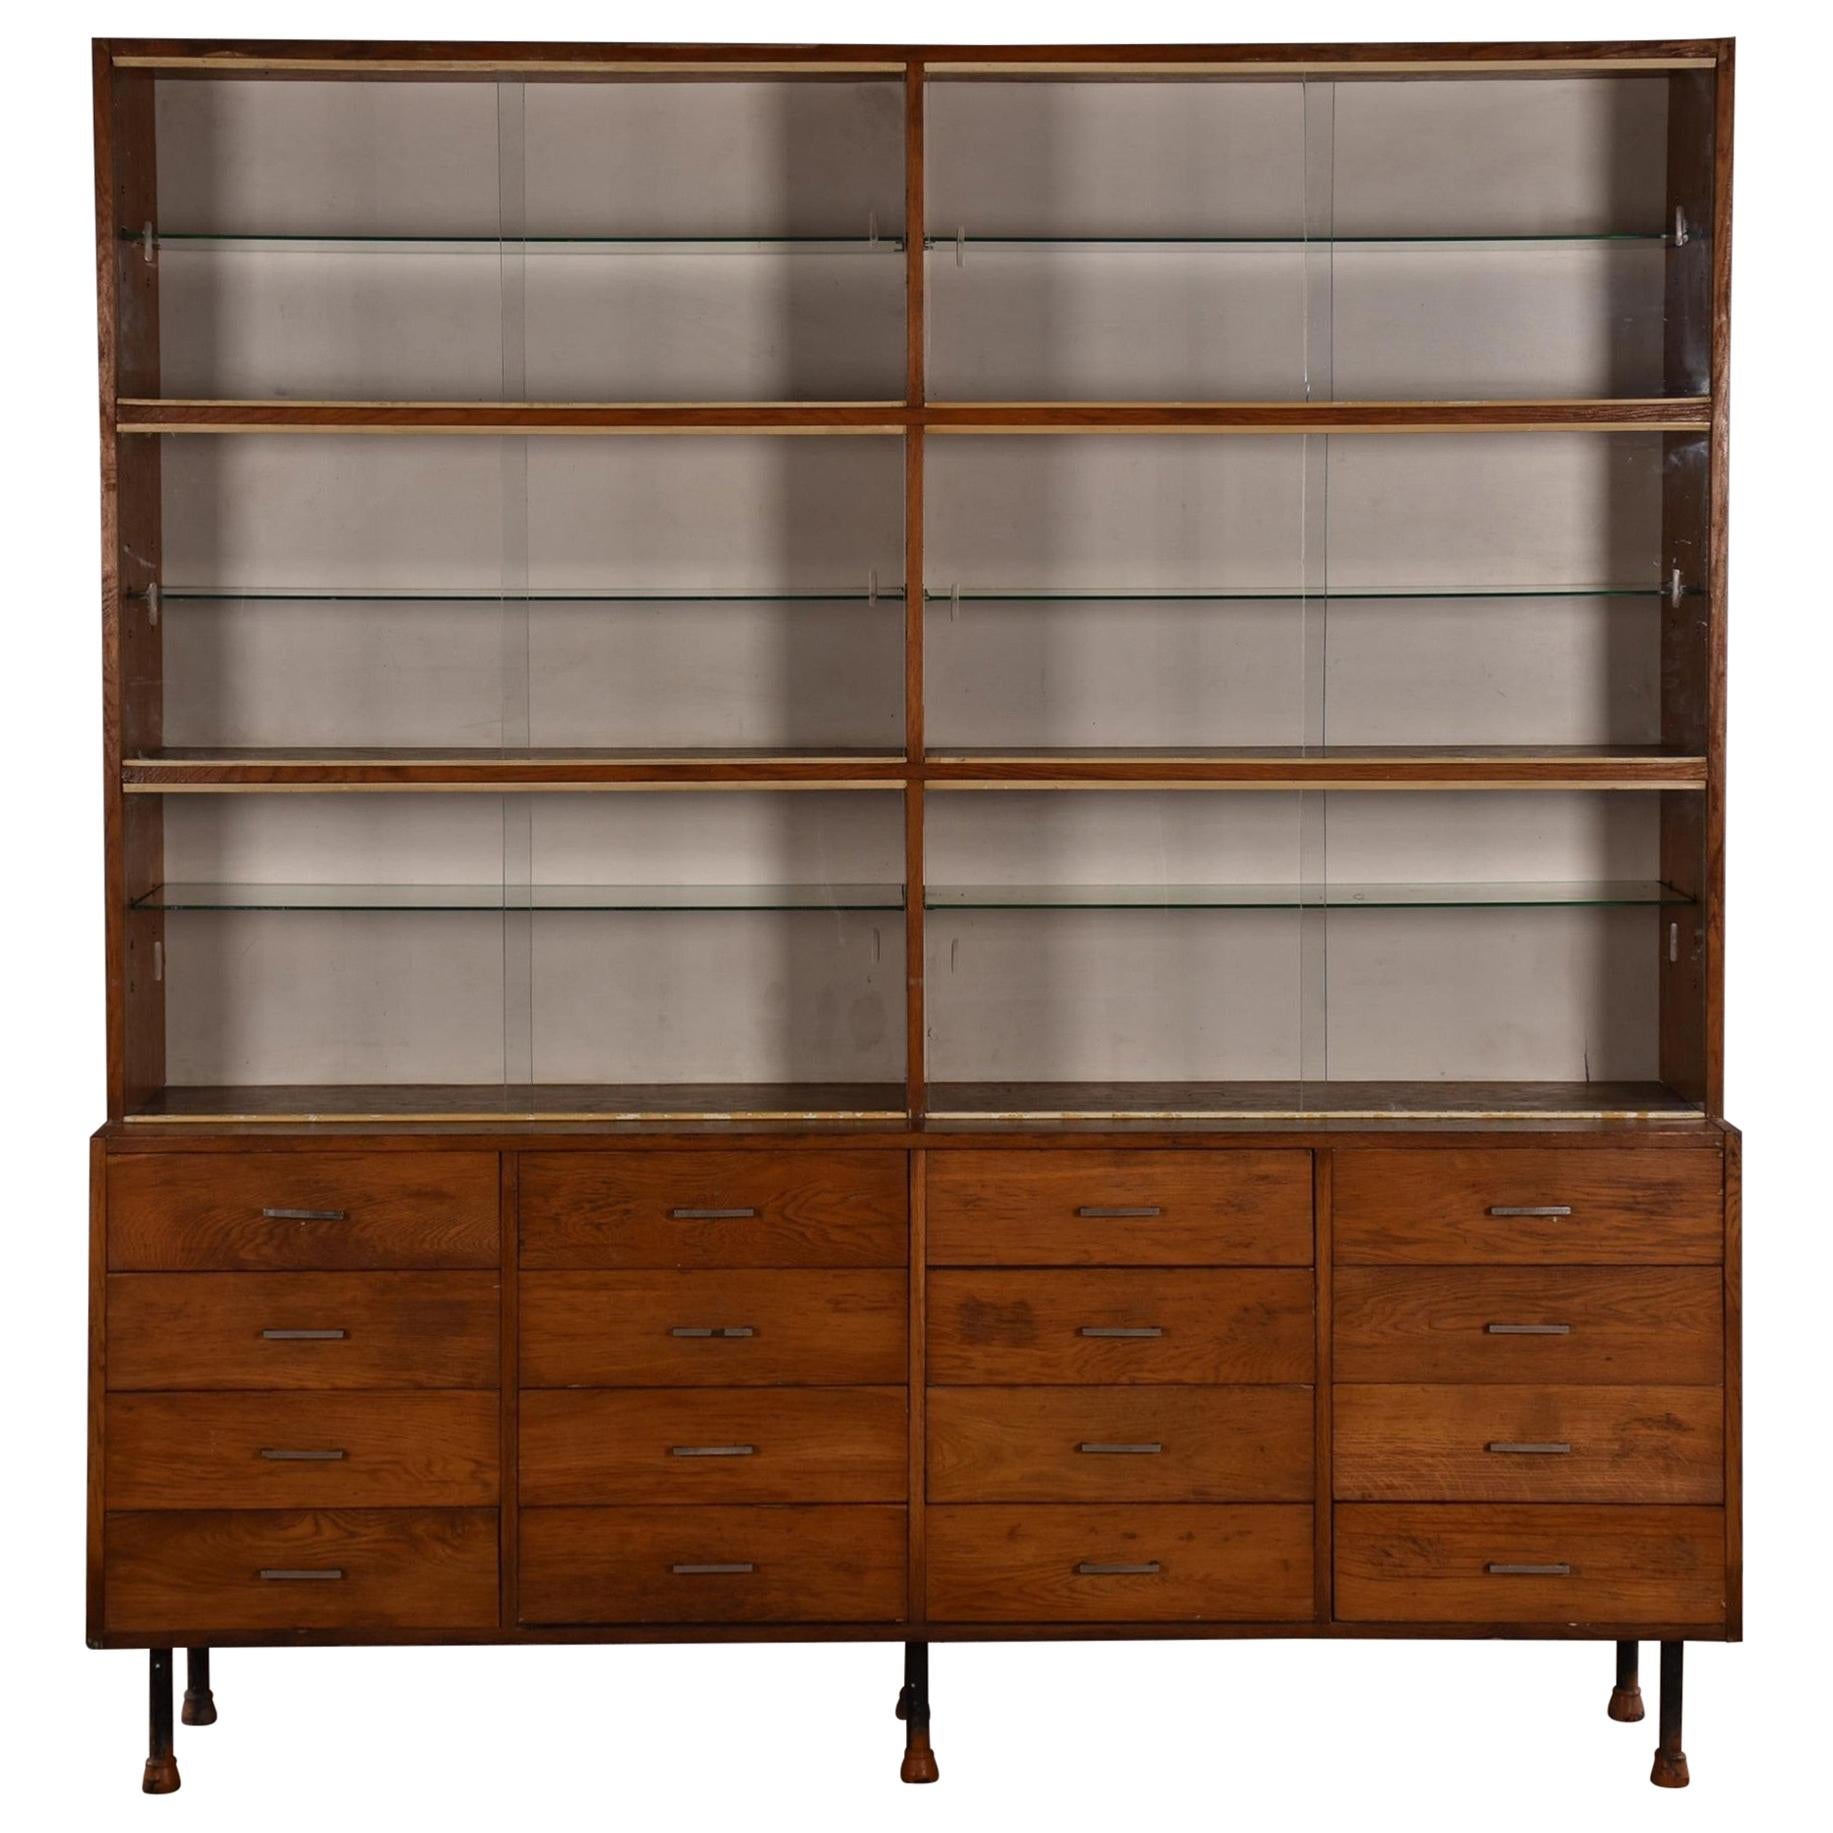 Apothecary haberdashery display cabinet circa 1930s number 12

Apothecary / pharmacy / chemist / shop display / restaurant cabinet circa 1930s

Apothecary Pharmacy beech display cabinet dating to circa 1930s, This piece is one of seven similar